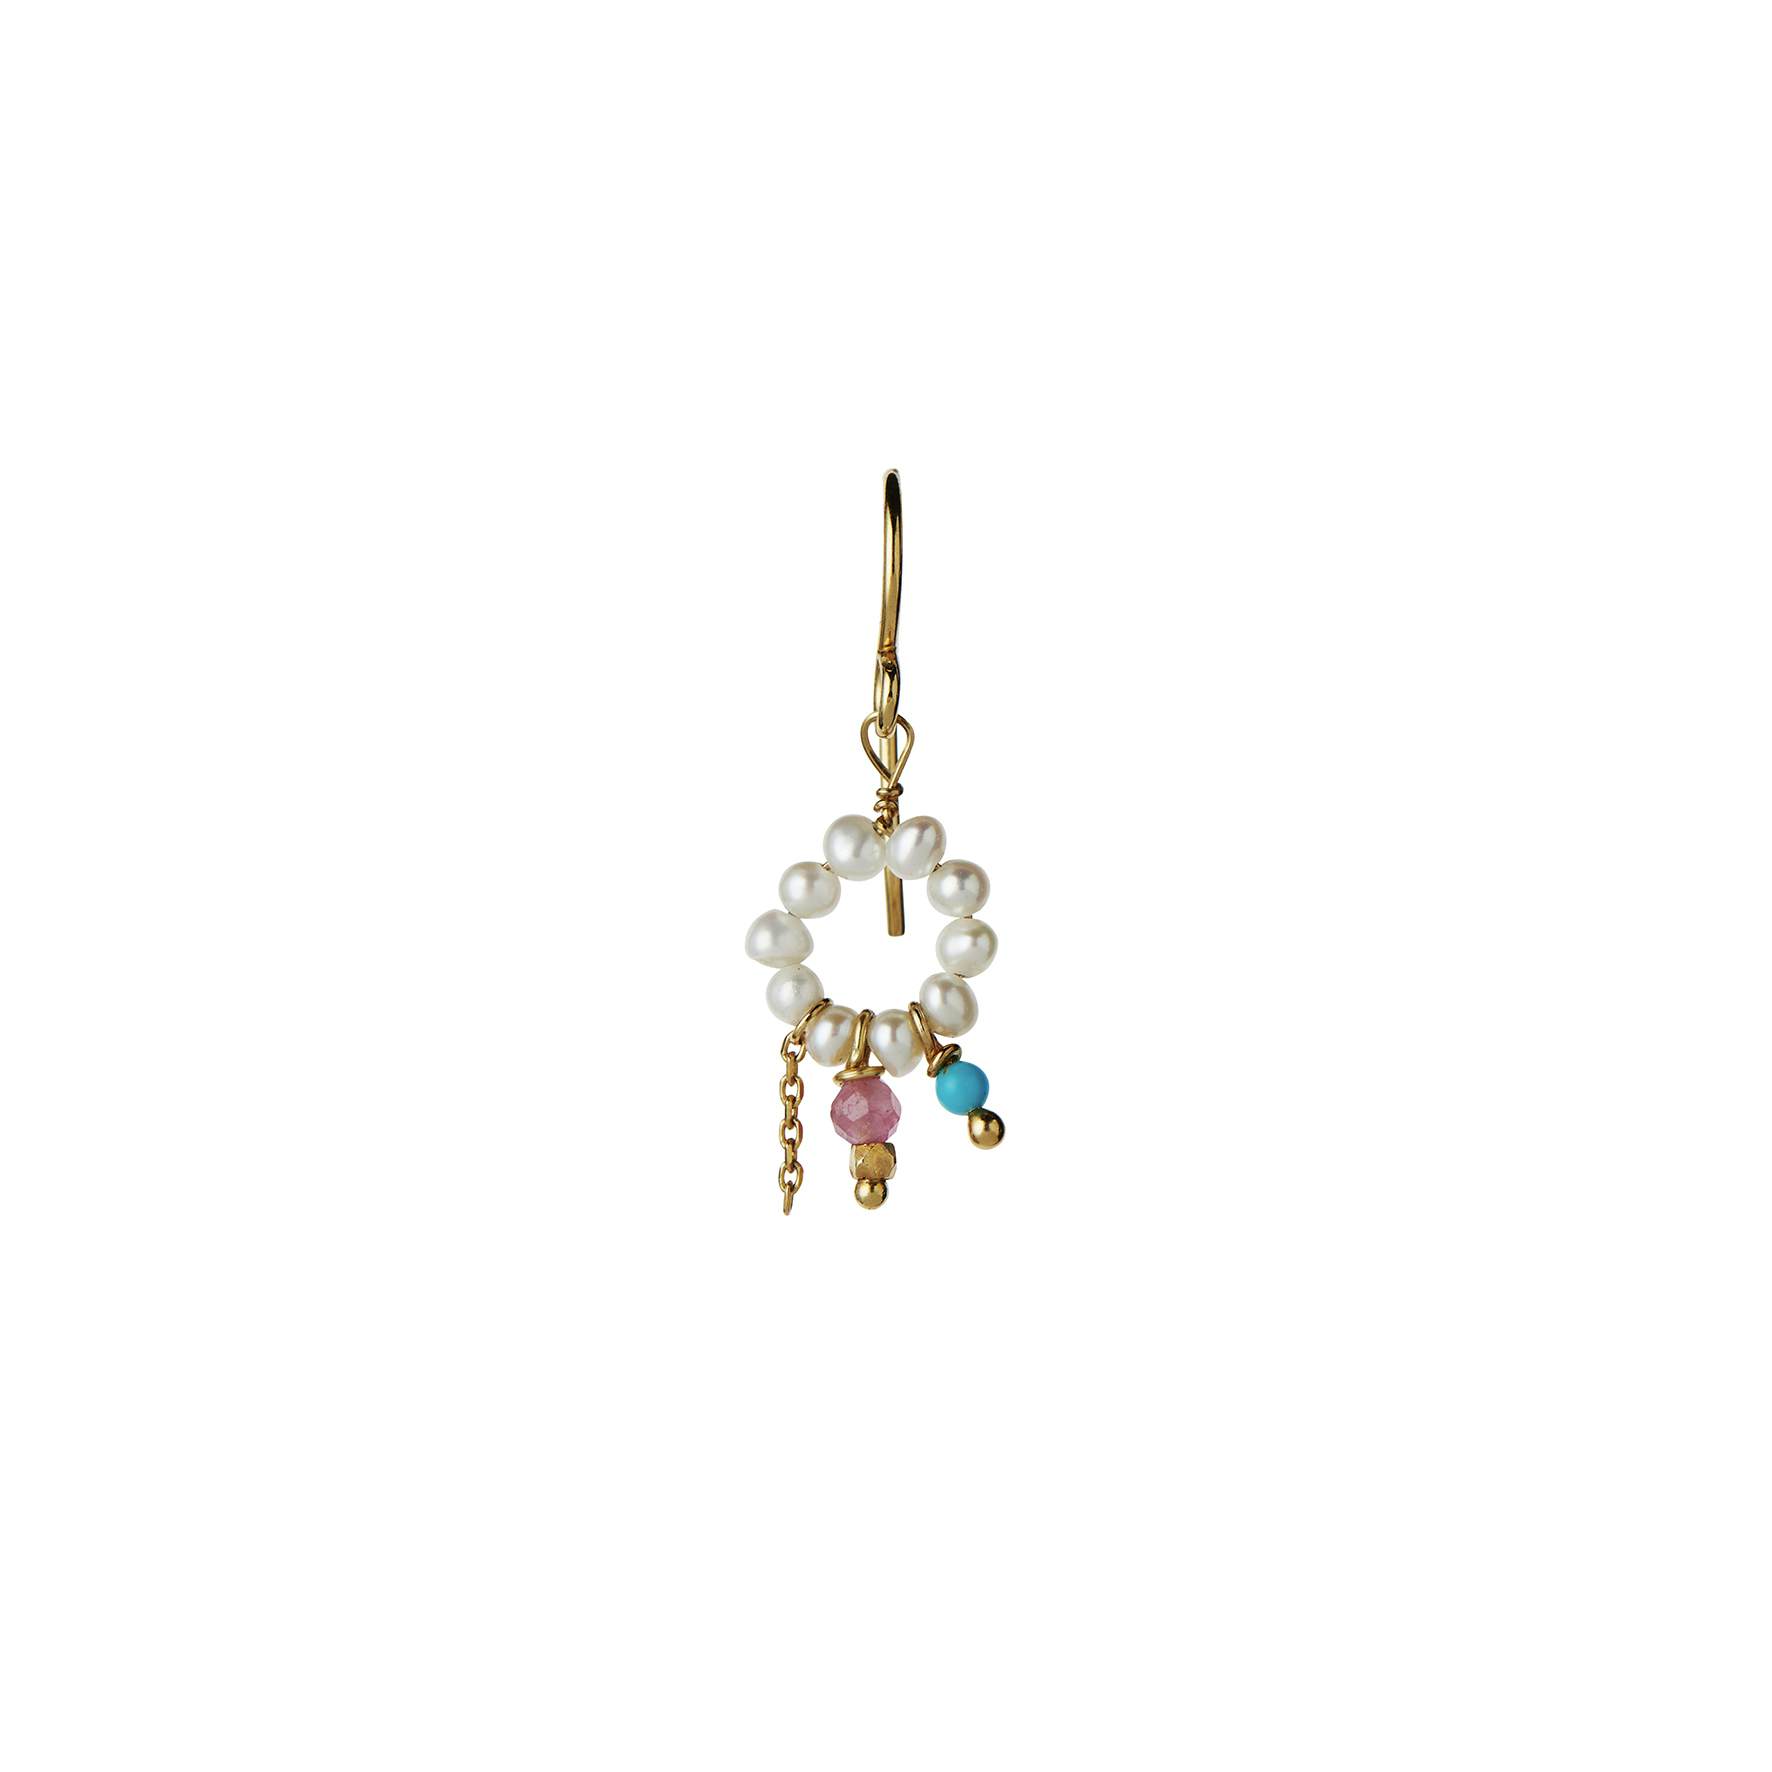 Petit Heavenly Pearl Dream Earring Turquoise & Pink Stones fra STINE A Jewelry i Forgylt-Sølv Sterling 925